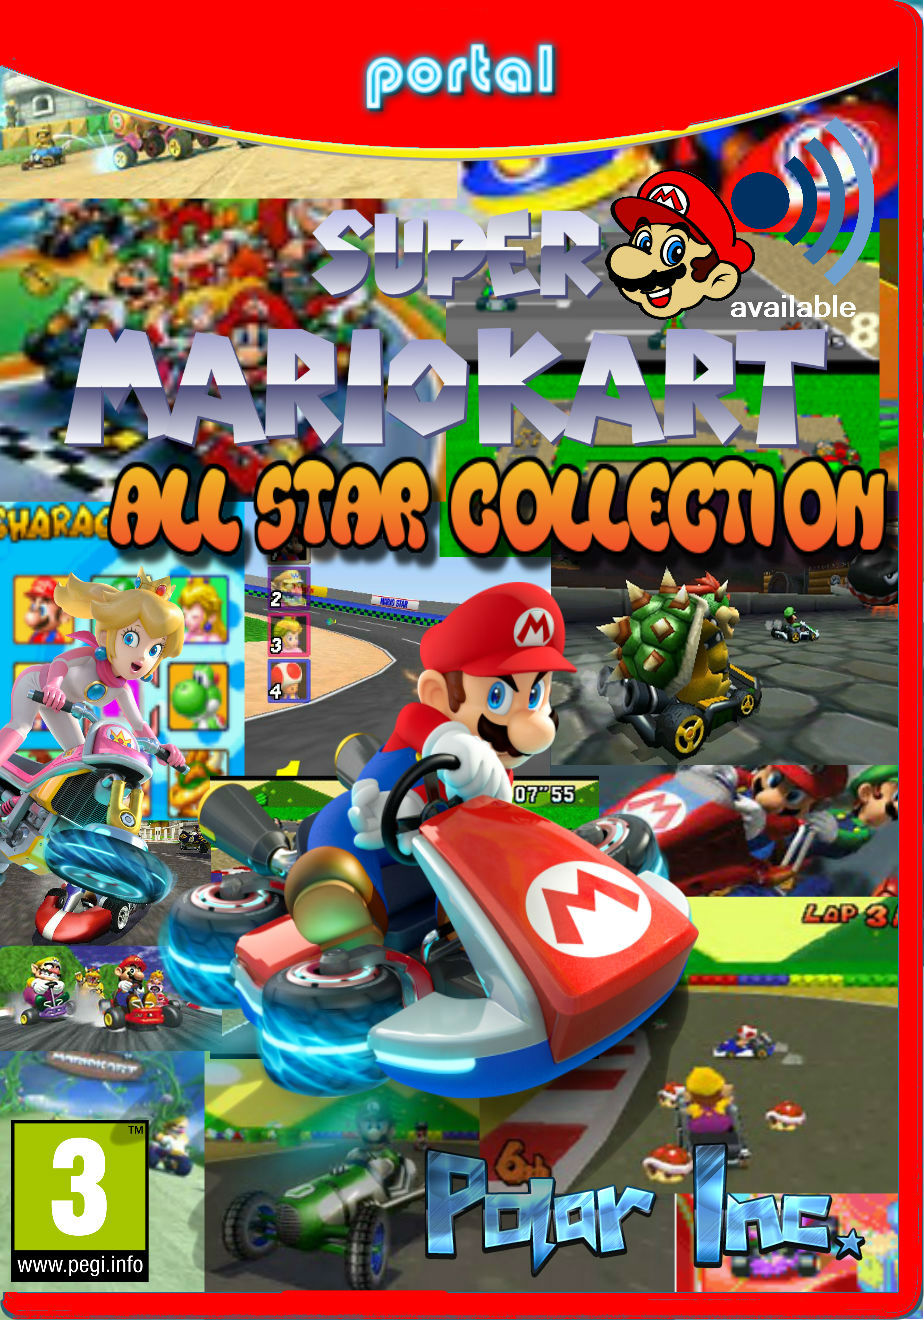 super collection 7.784 games